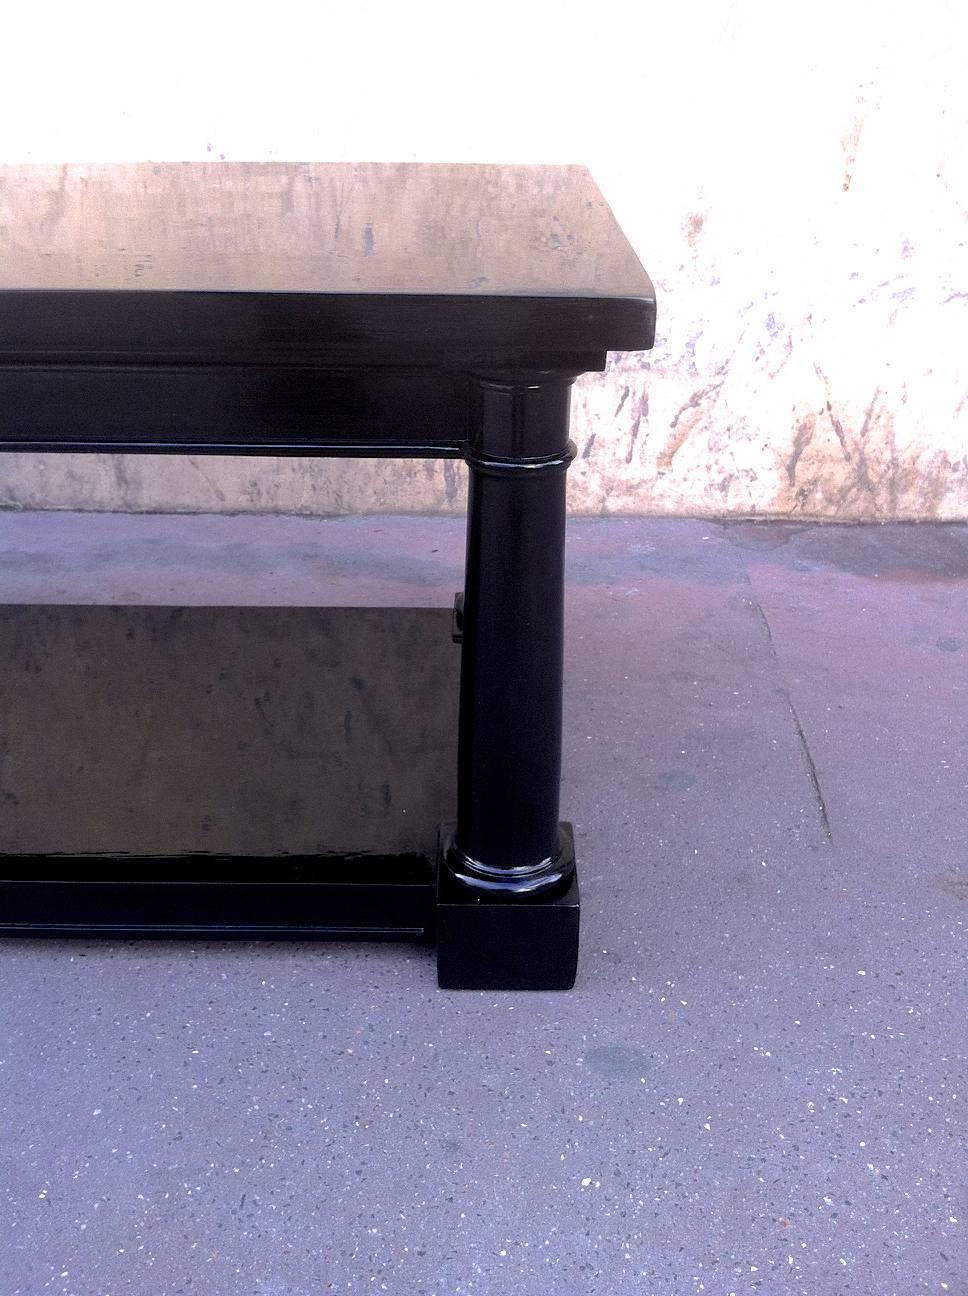 Maison Jansen Rare Extremely Long Neoclassic Black Lacquered Coffee Table 1